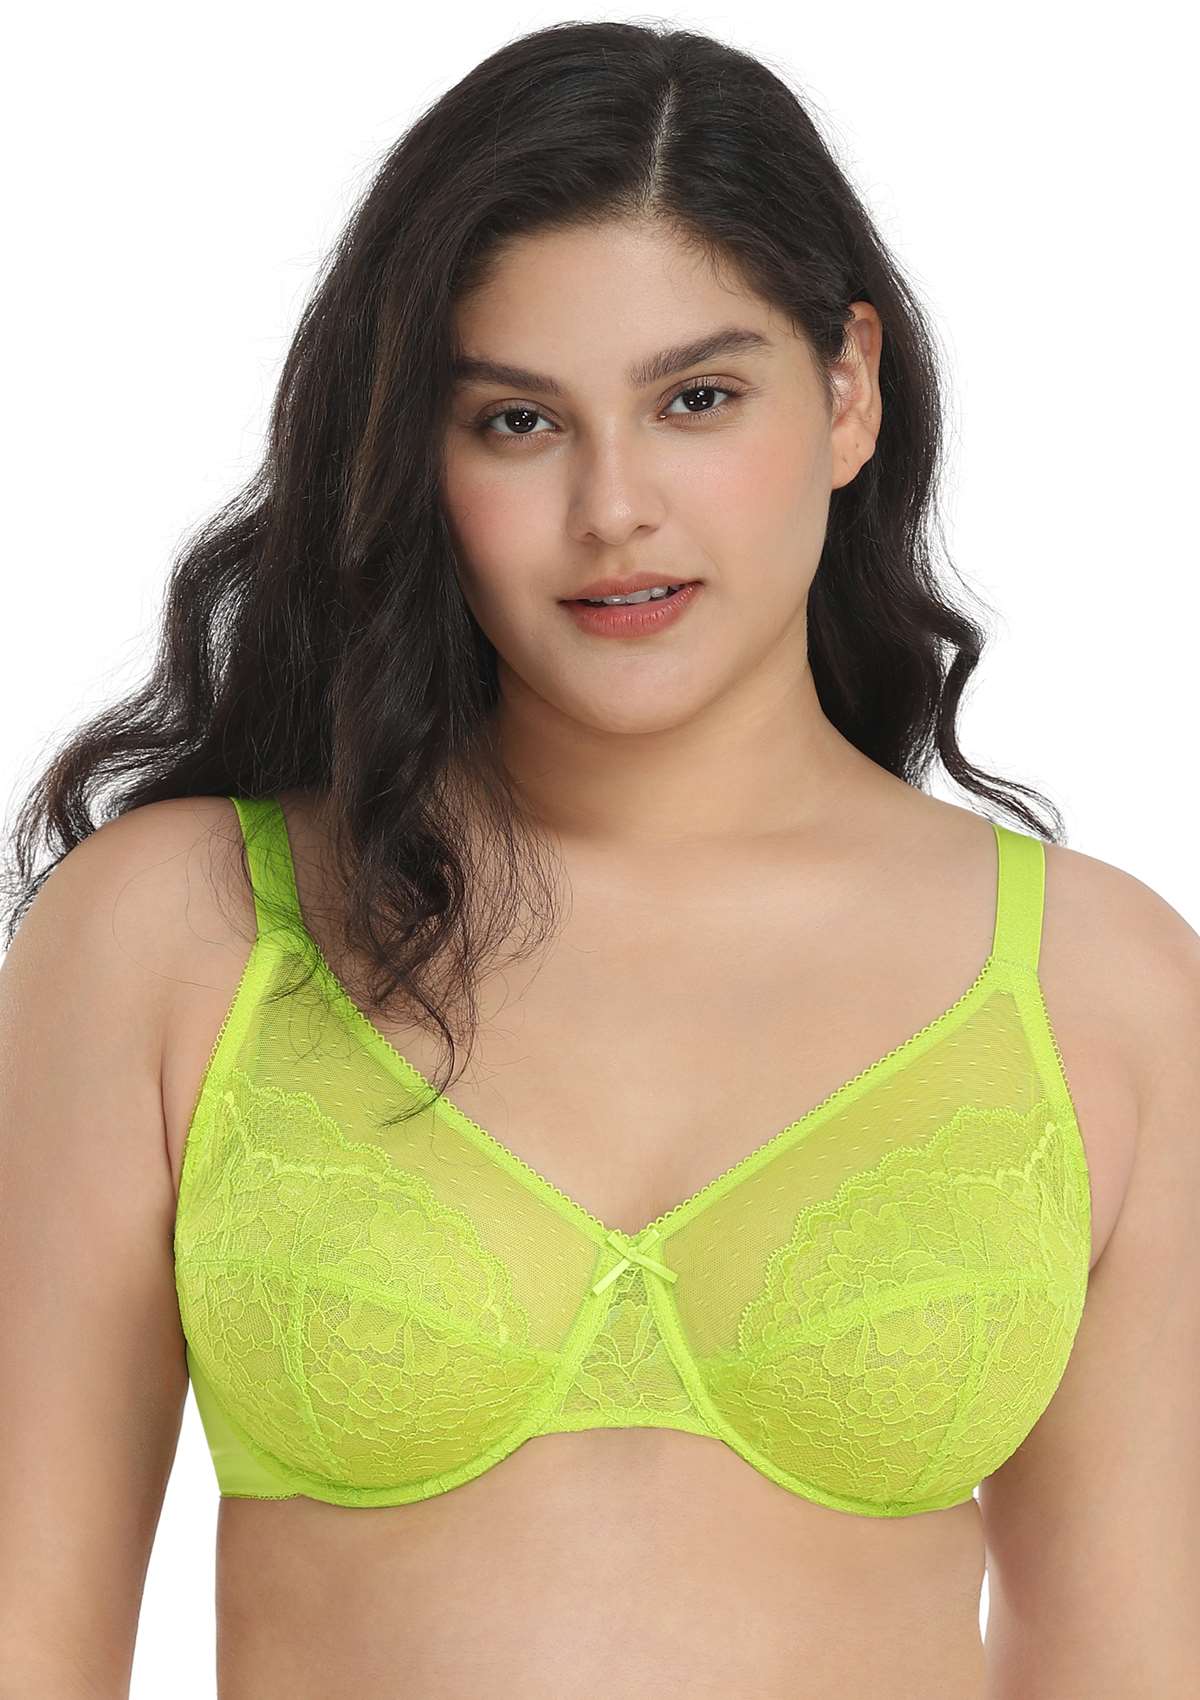 HSIA Enchante Full Cup Minimizing Bra: Supportive Unlined Lace Bra - Lime Green / 42 / G